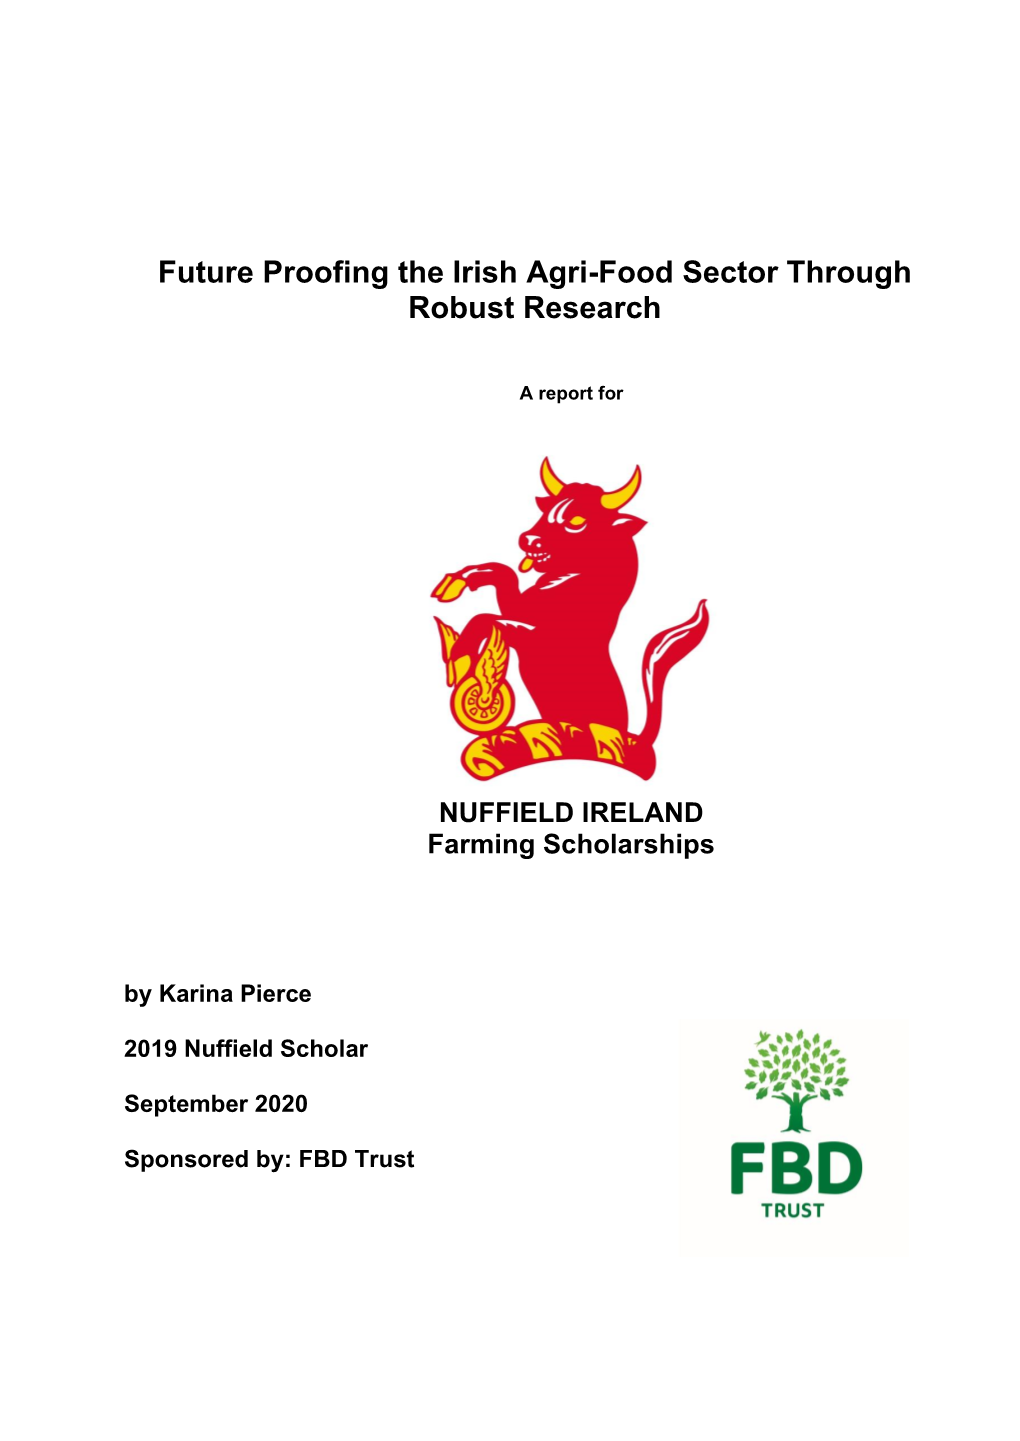 Future Proofing the Irish Agri-Food Sector Through Robust Research